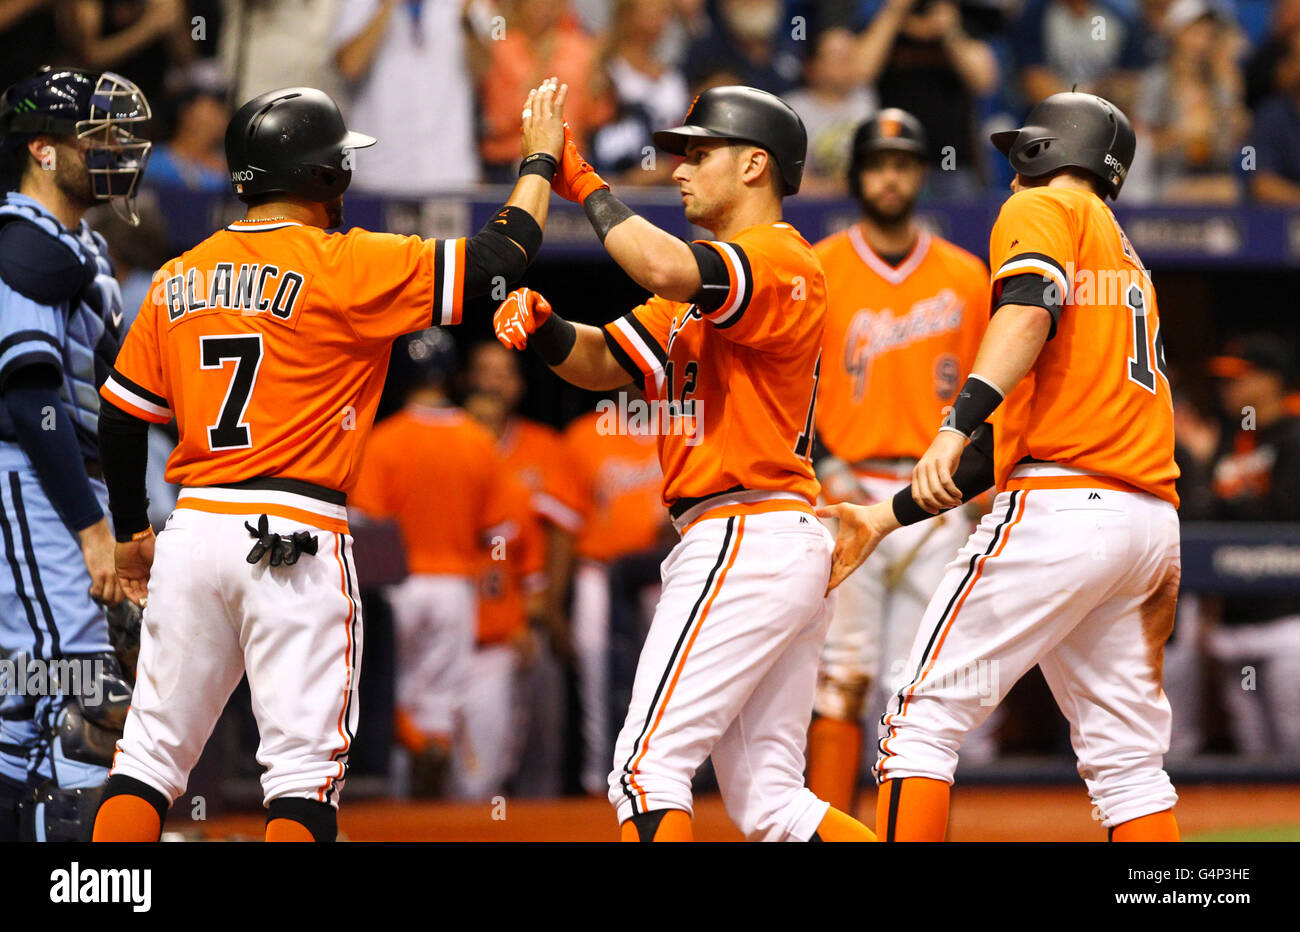 St. Petersburg, Florida, USA. 18th June, 2016. WILL VRAGOVIC | Times.San Francisco Giants second baseman Joe Panik (12) celebrates his three run home run in the ninth inning of the game between the San Francisco Giants and the Tampa Bay Rays at Tropicana Field in St. Petersburg, Fla. on Saturday, June 18, 2016. The San Francisco Giants beat the Tampa Bay Rays 6-4. © Will Vragovic/Tampa Bay Times/ZUMA Wire/Alamy Live News Stock Photo